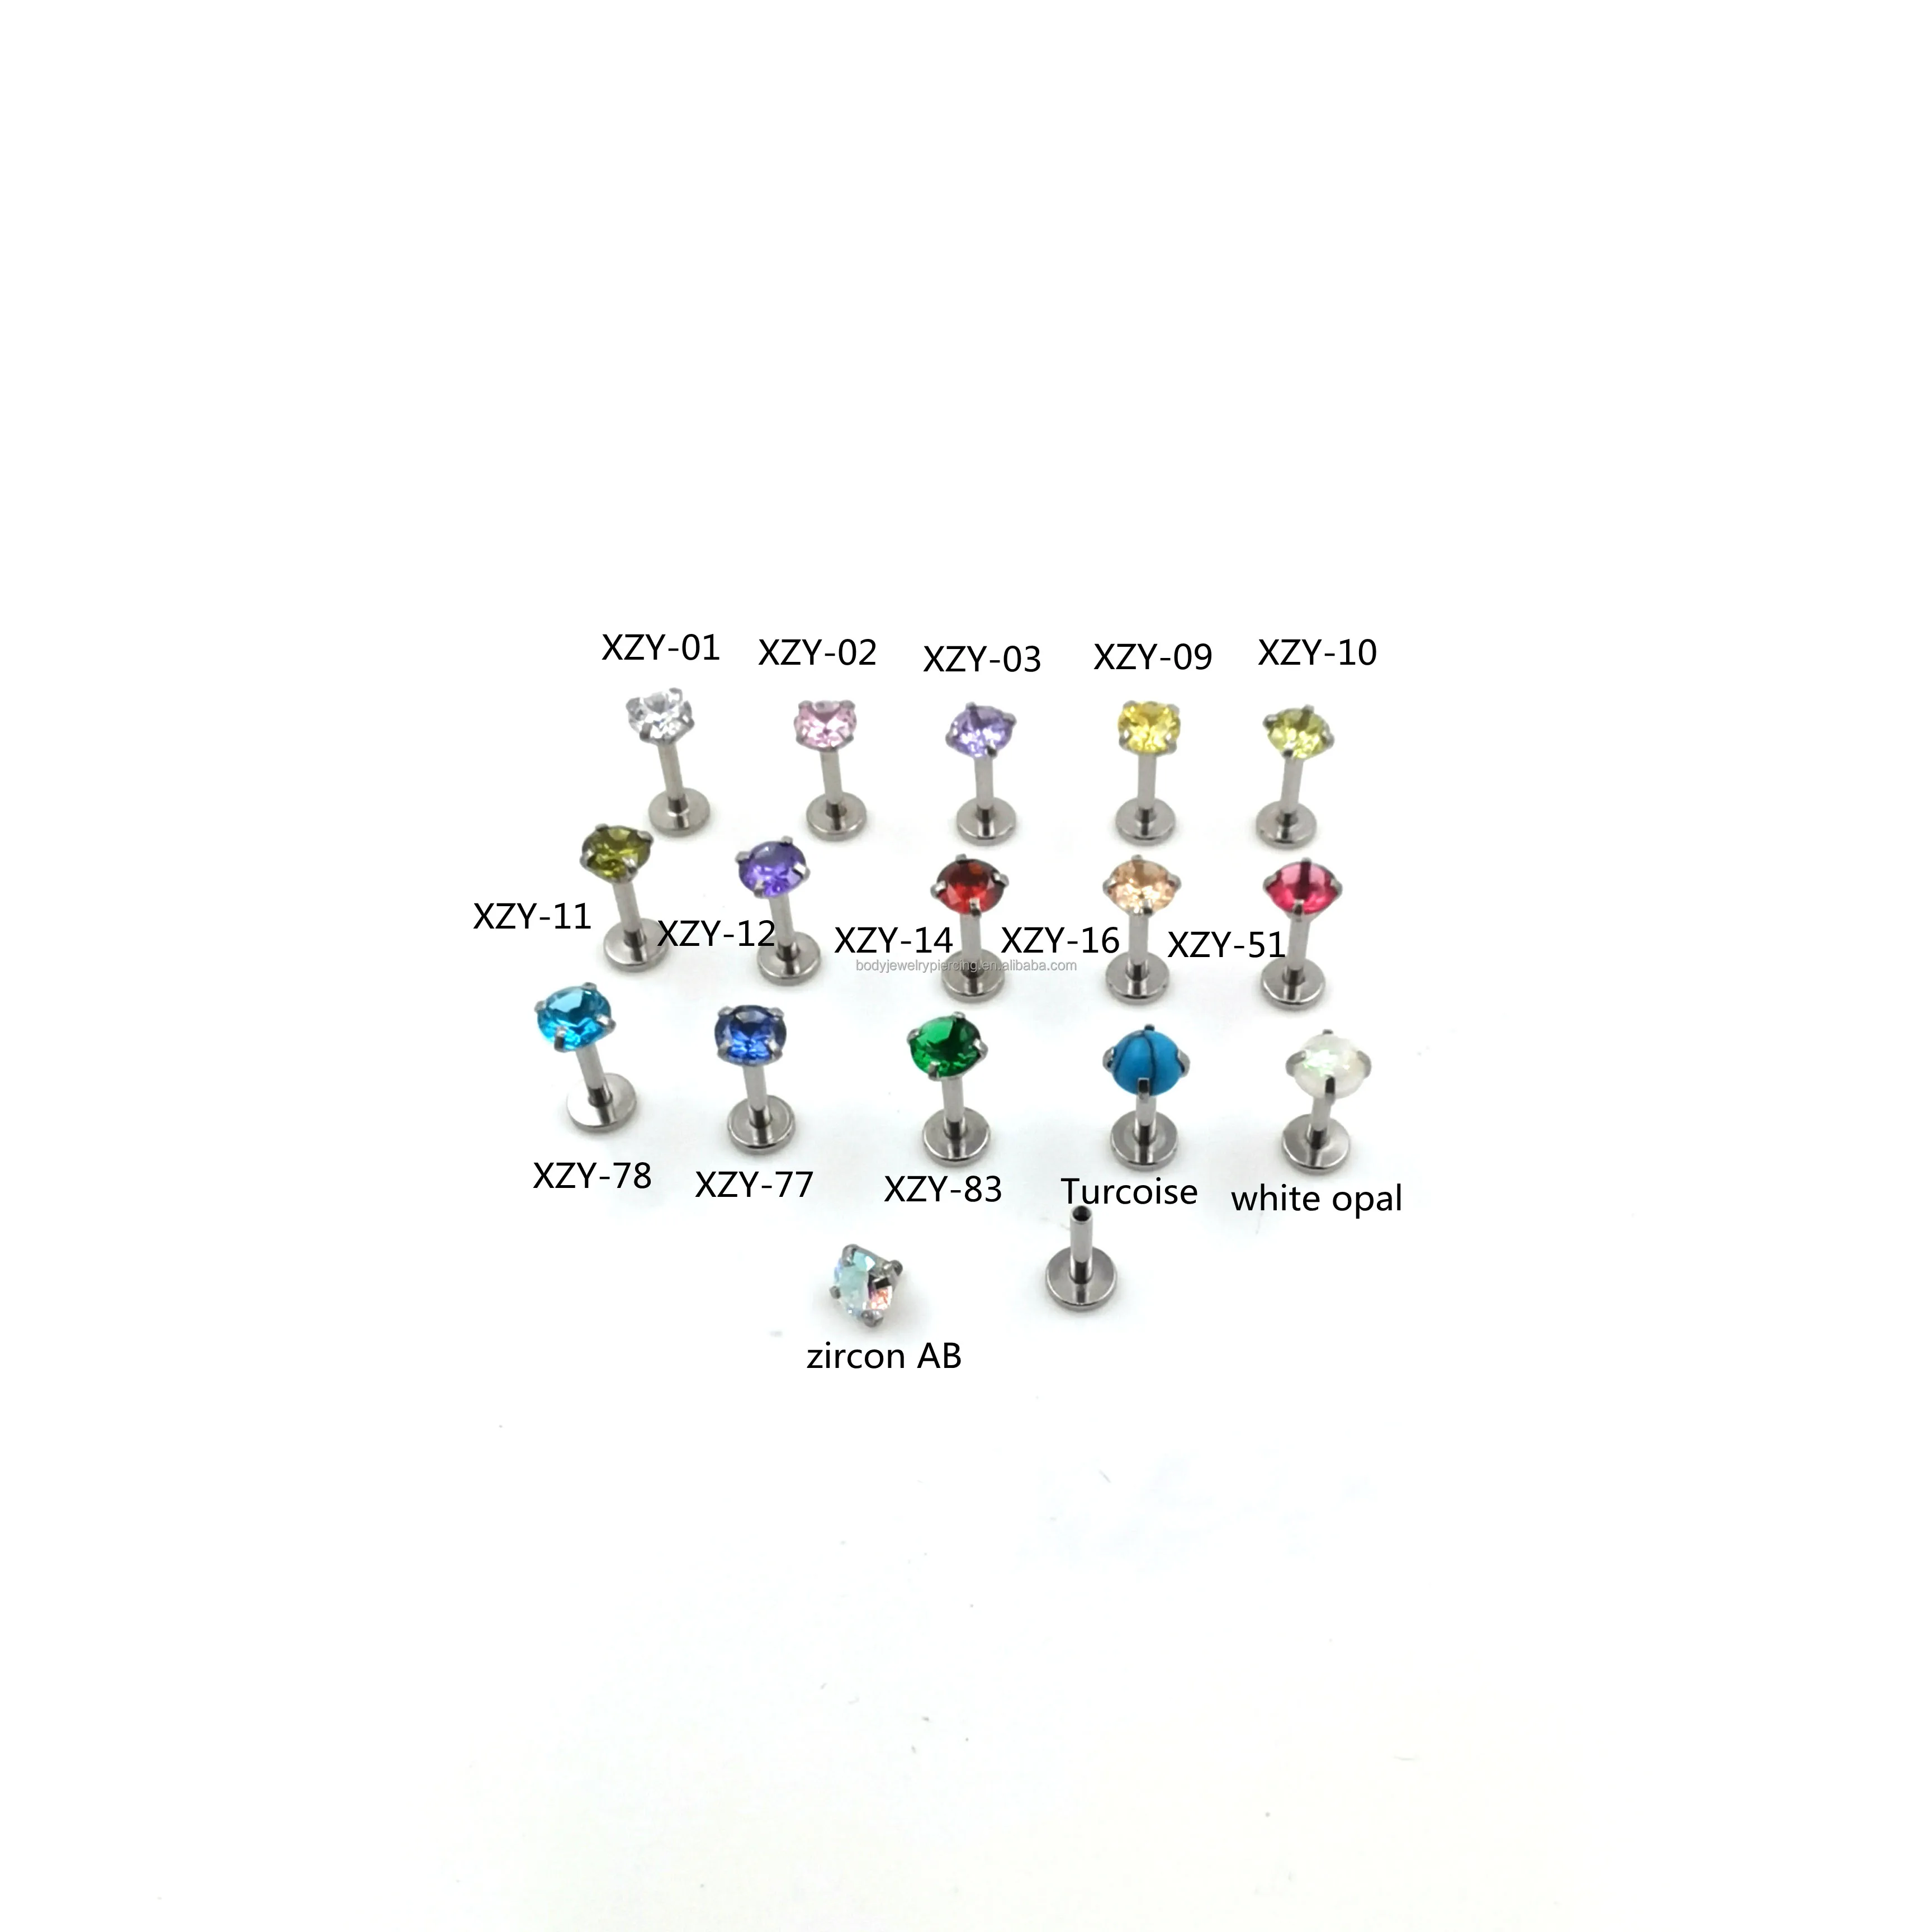 

16G Stainless Steel Zircon Colorful Labret Stud Lip Rings Ear Cartilage Tragus Piercing Sexy Girls Jewelry, As show